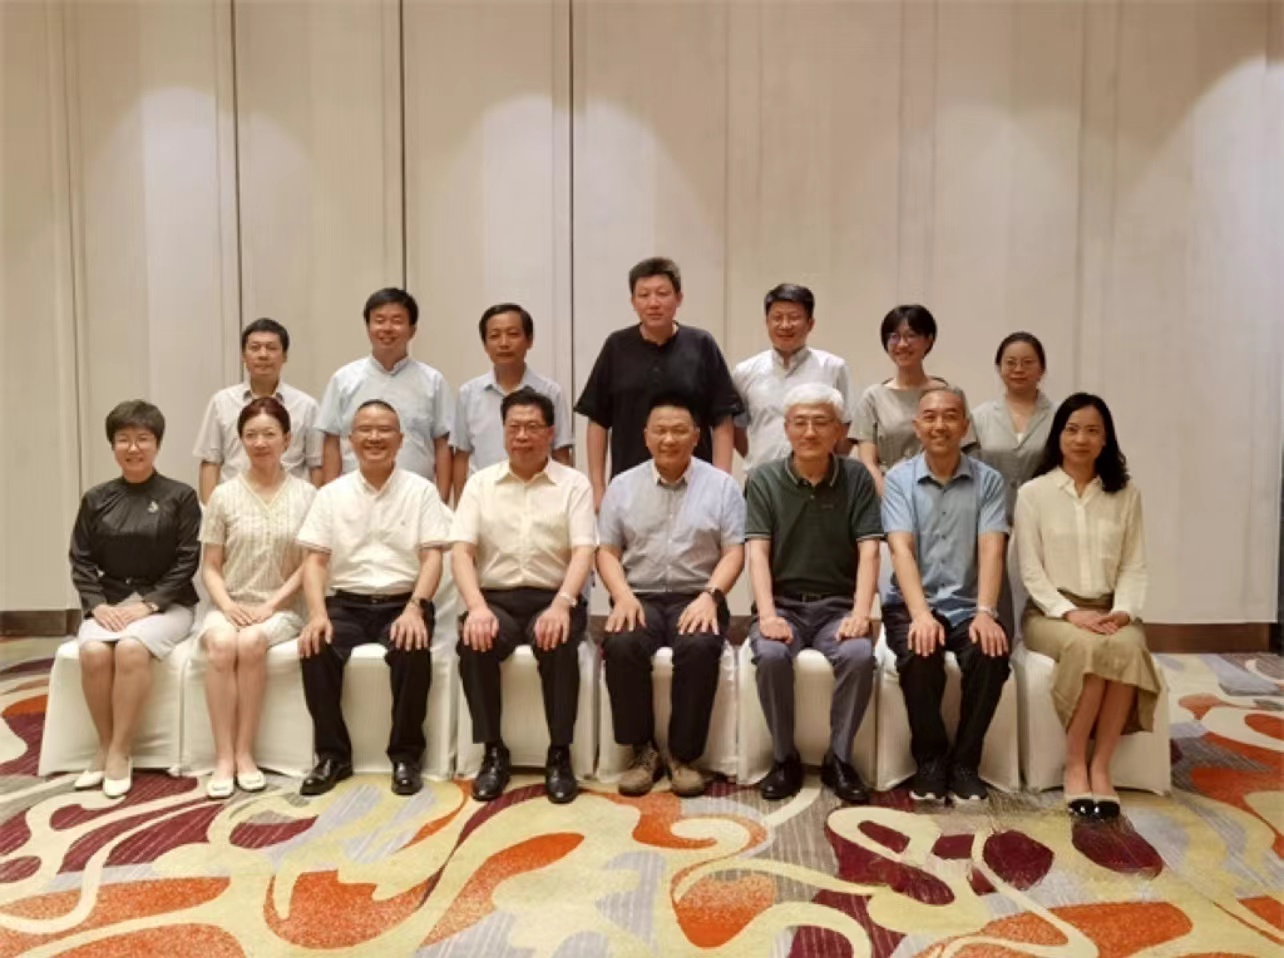 The Media Ministry Committee of the current session of CCC&TSPM convened its annual work conference in in Wuxi, Jiangsu, from August 21st to 22nd, 2023. 